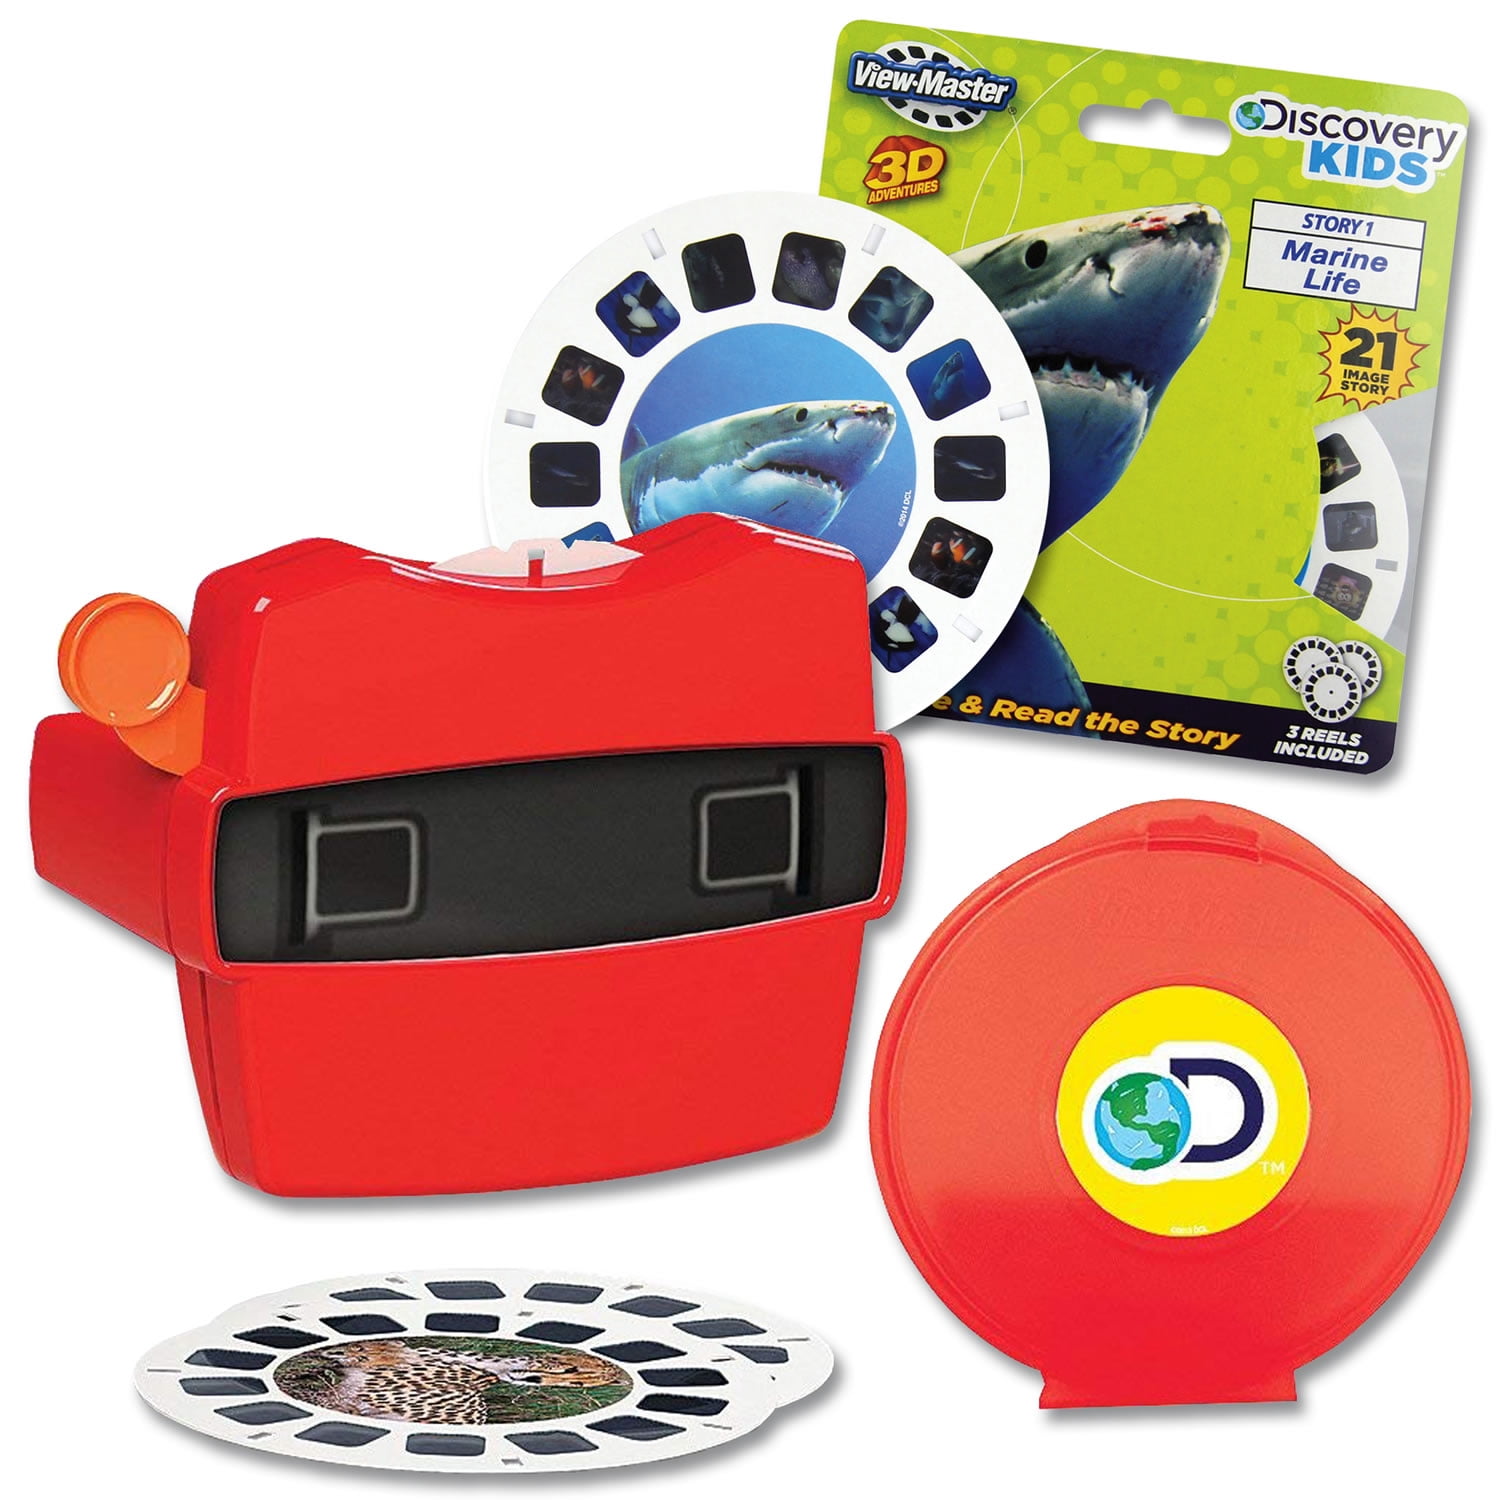 BEDTIME 3D Picture Viewer 21 Images/3 Reels Storybook view master Set 